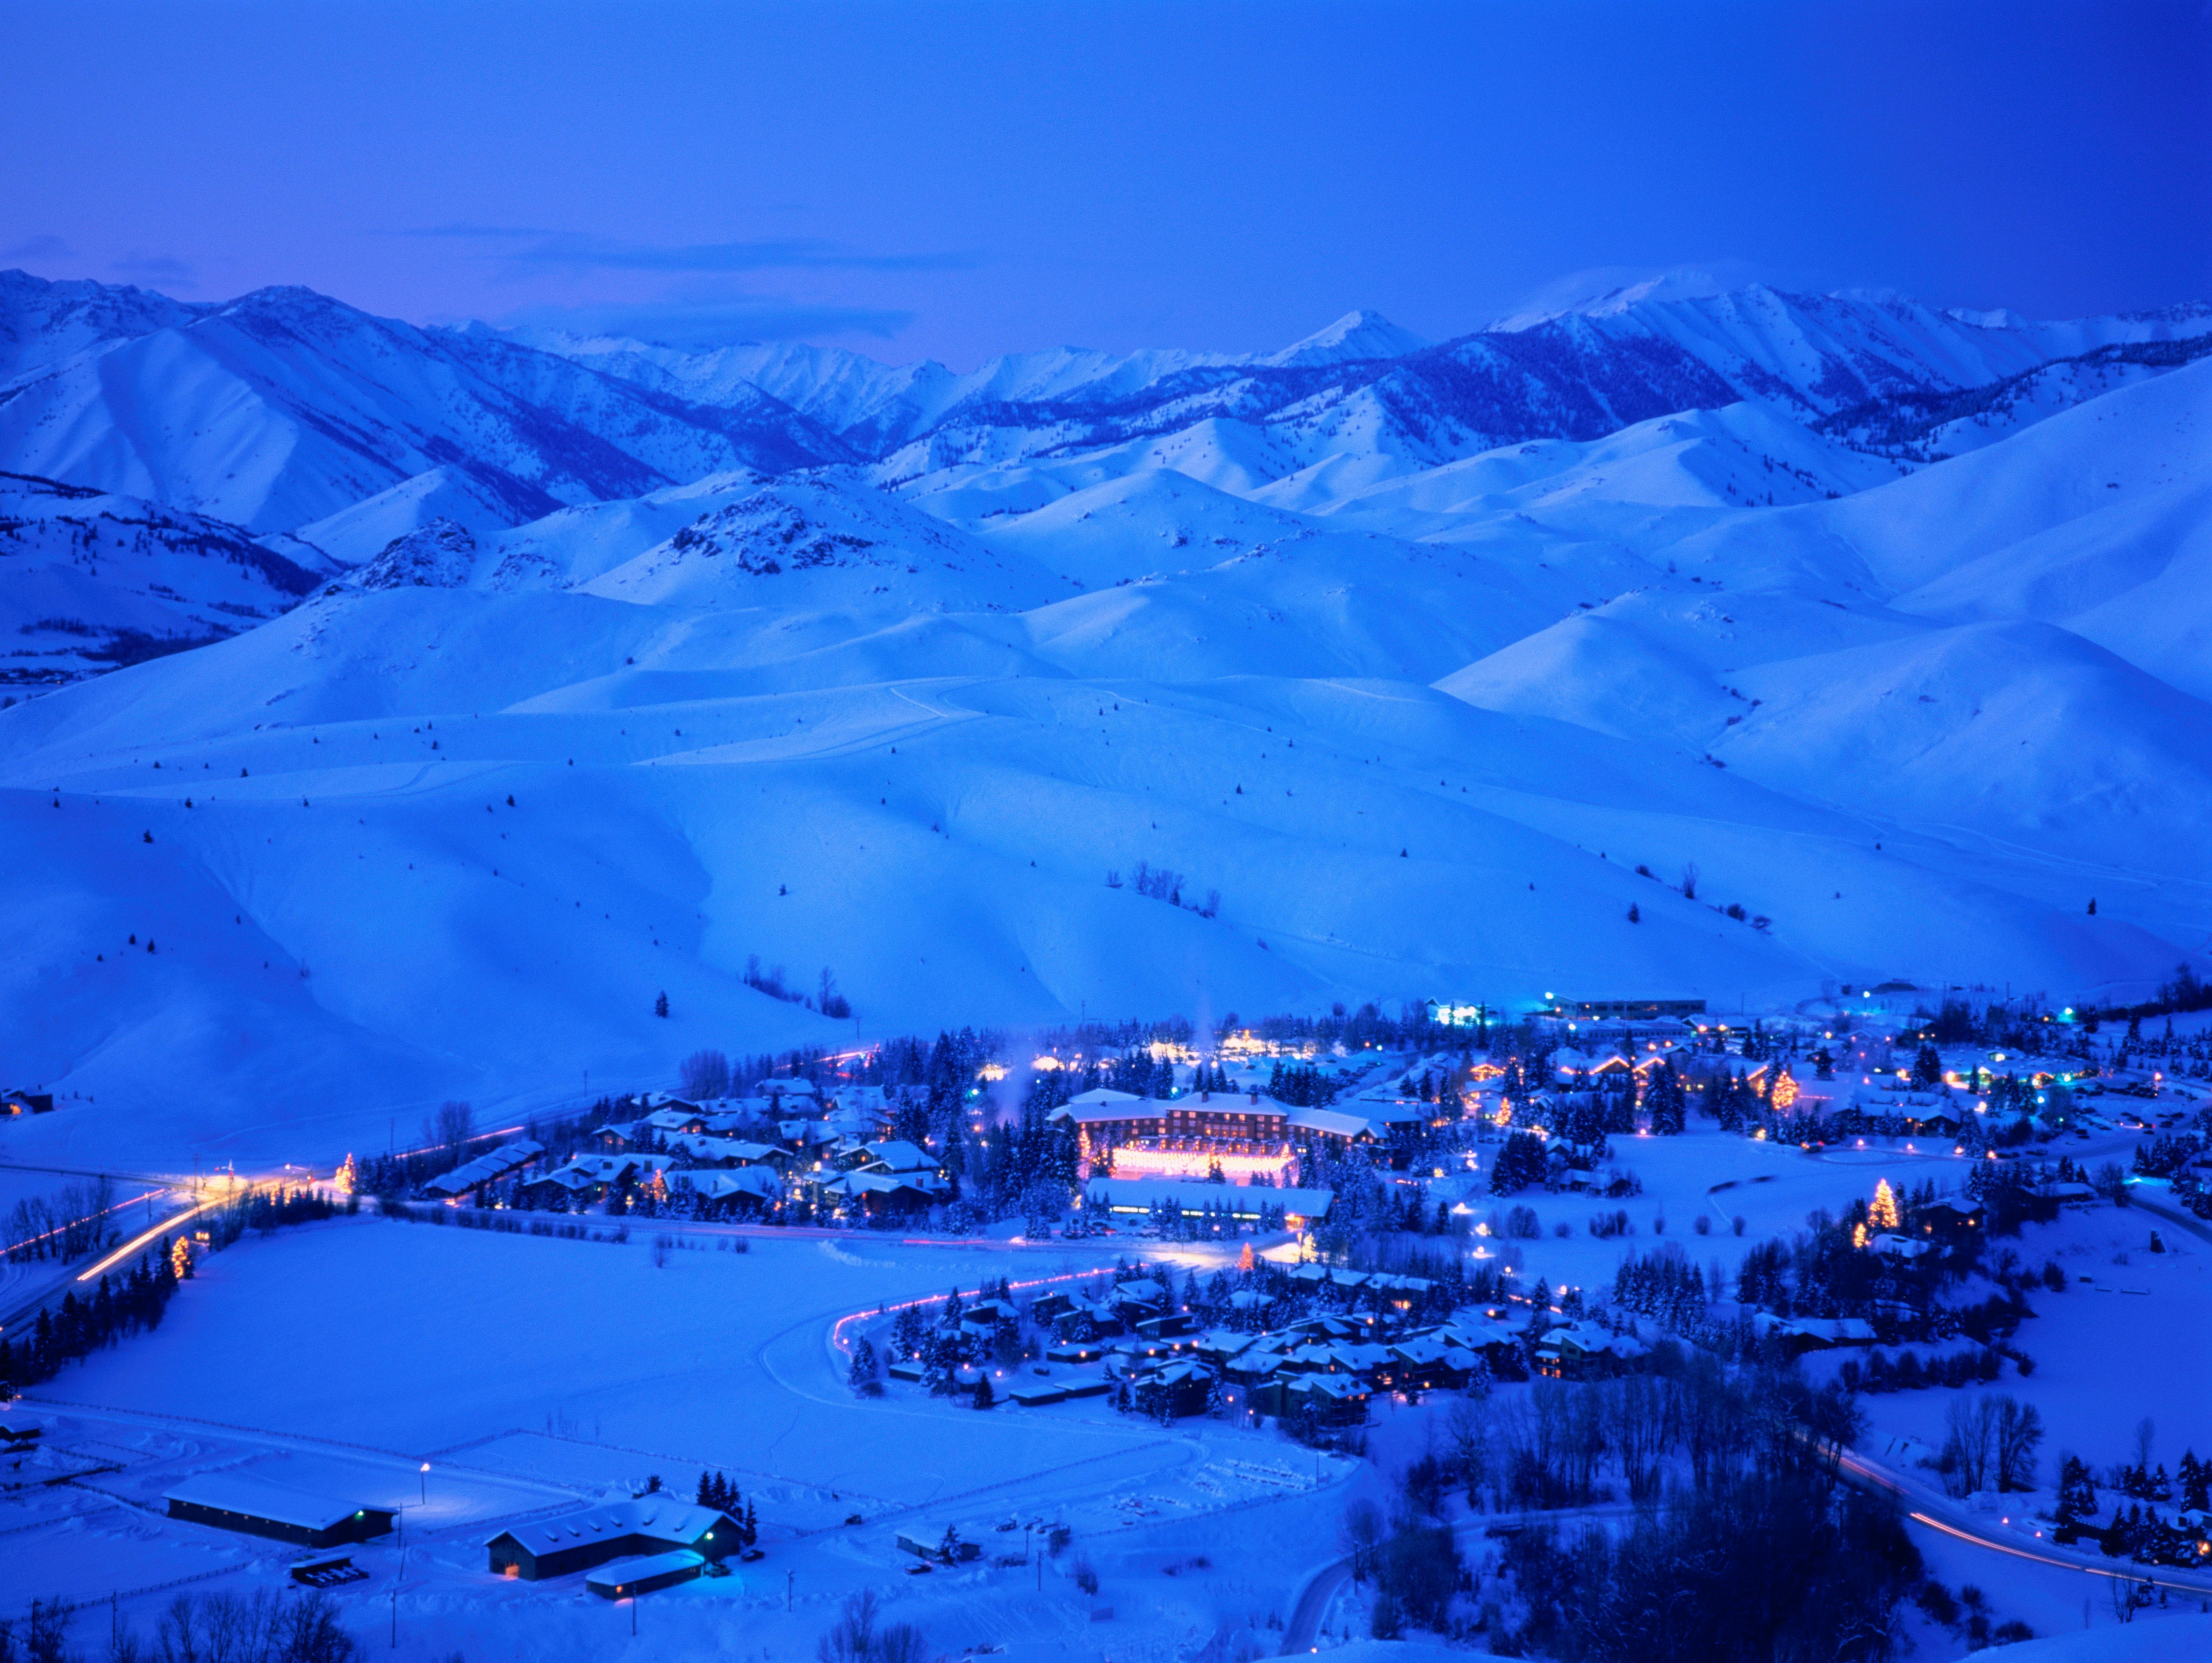 The snowy mountains around Sun Valley Lodge are a deep cobalt blue cast in the early evening. Some of the buildings glow yellow against the snow, but most are a mass of dark geometric shapes against the massif